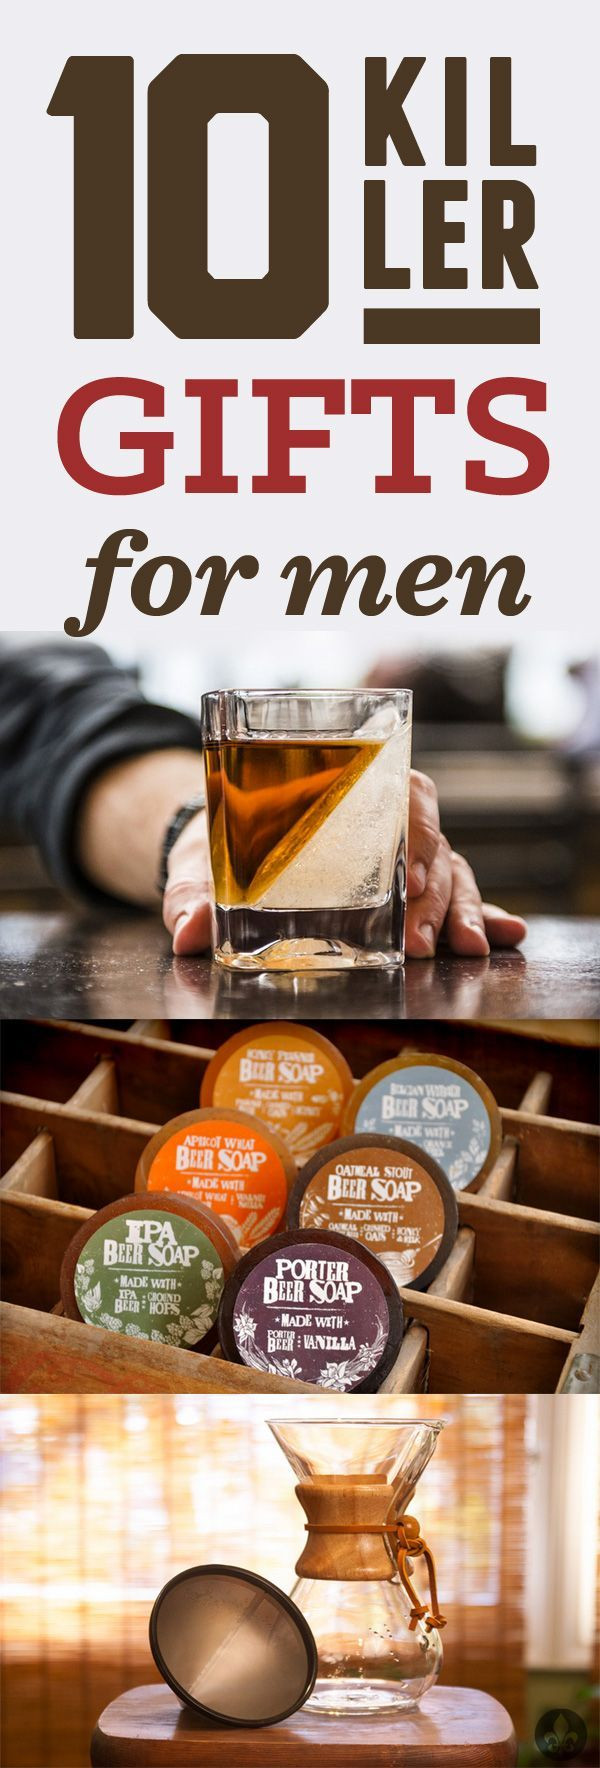 DIY Gifts For Men
 10 KILLER Gifts Every Man Must Have